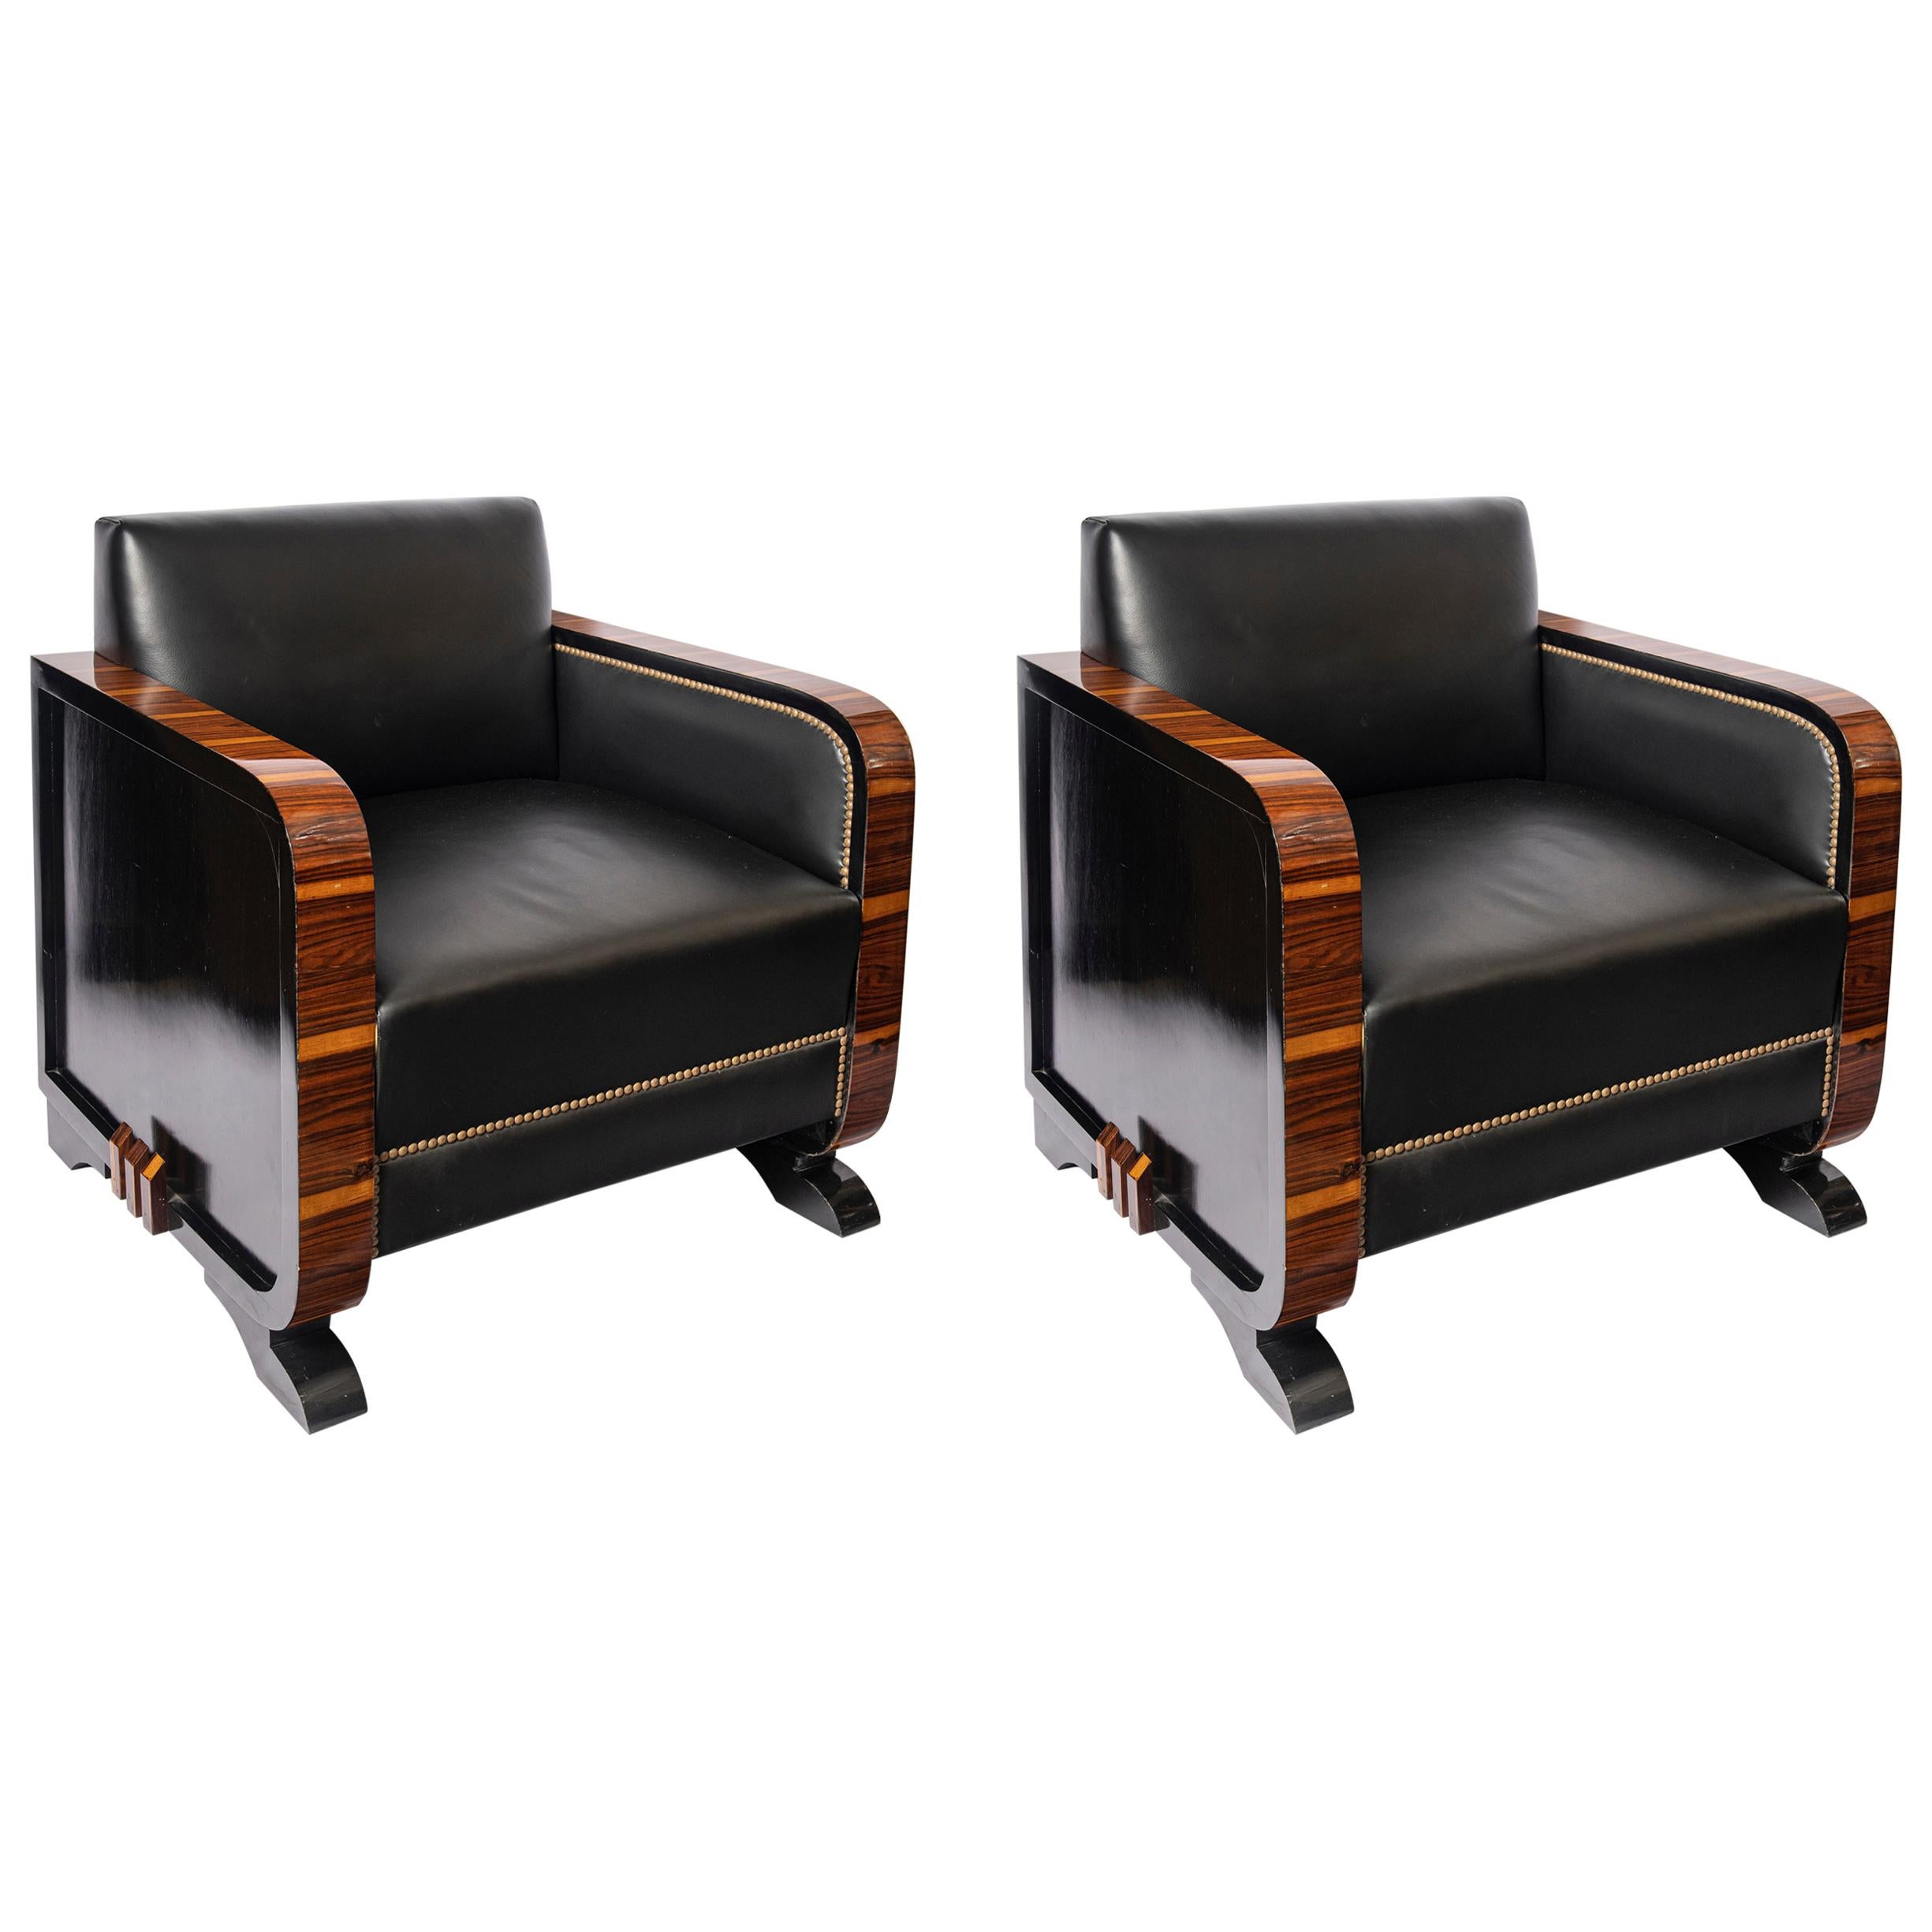 Pair of Wood and Leather Armchairs, Art Deco Period, France, circa 1940